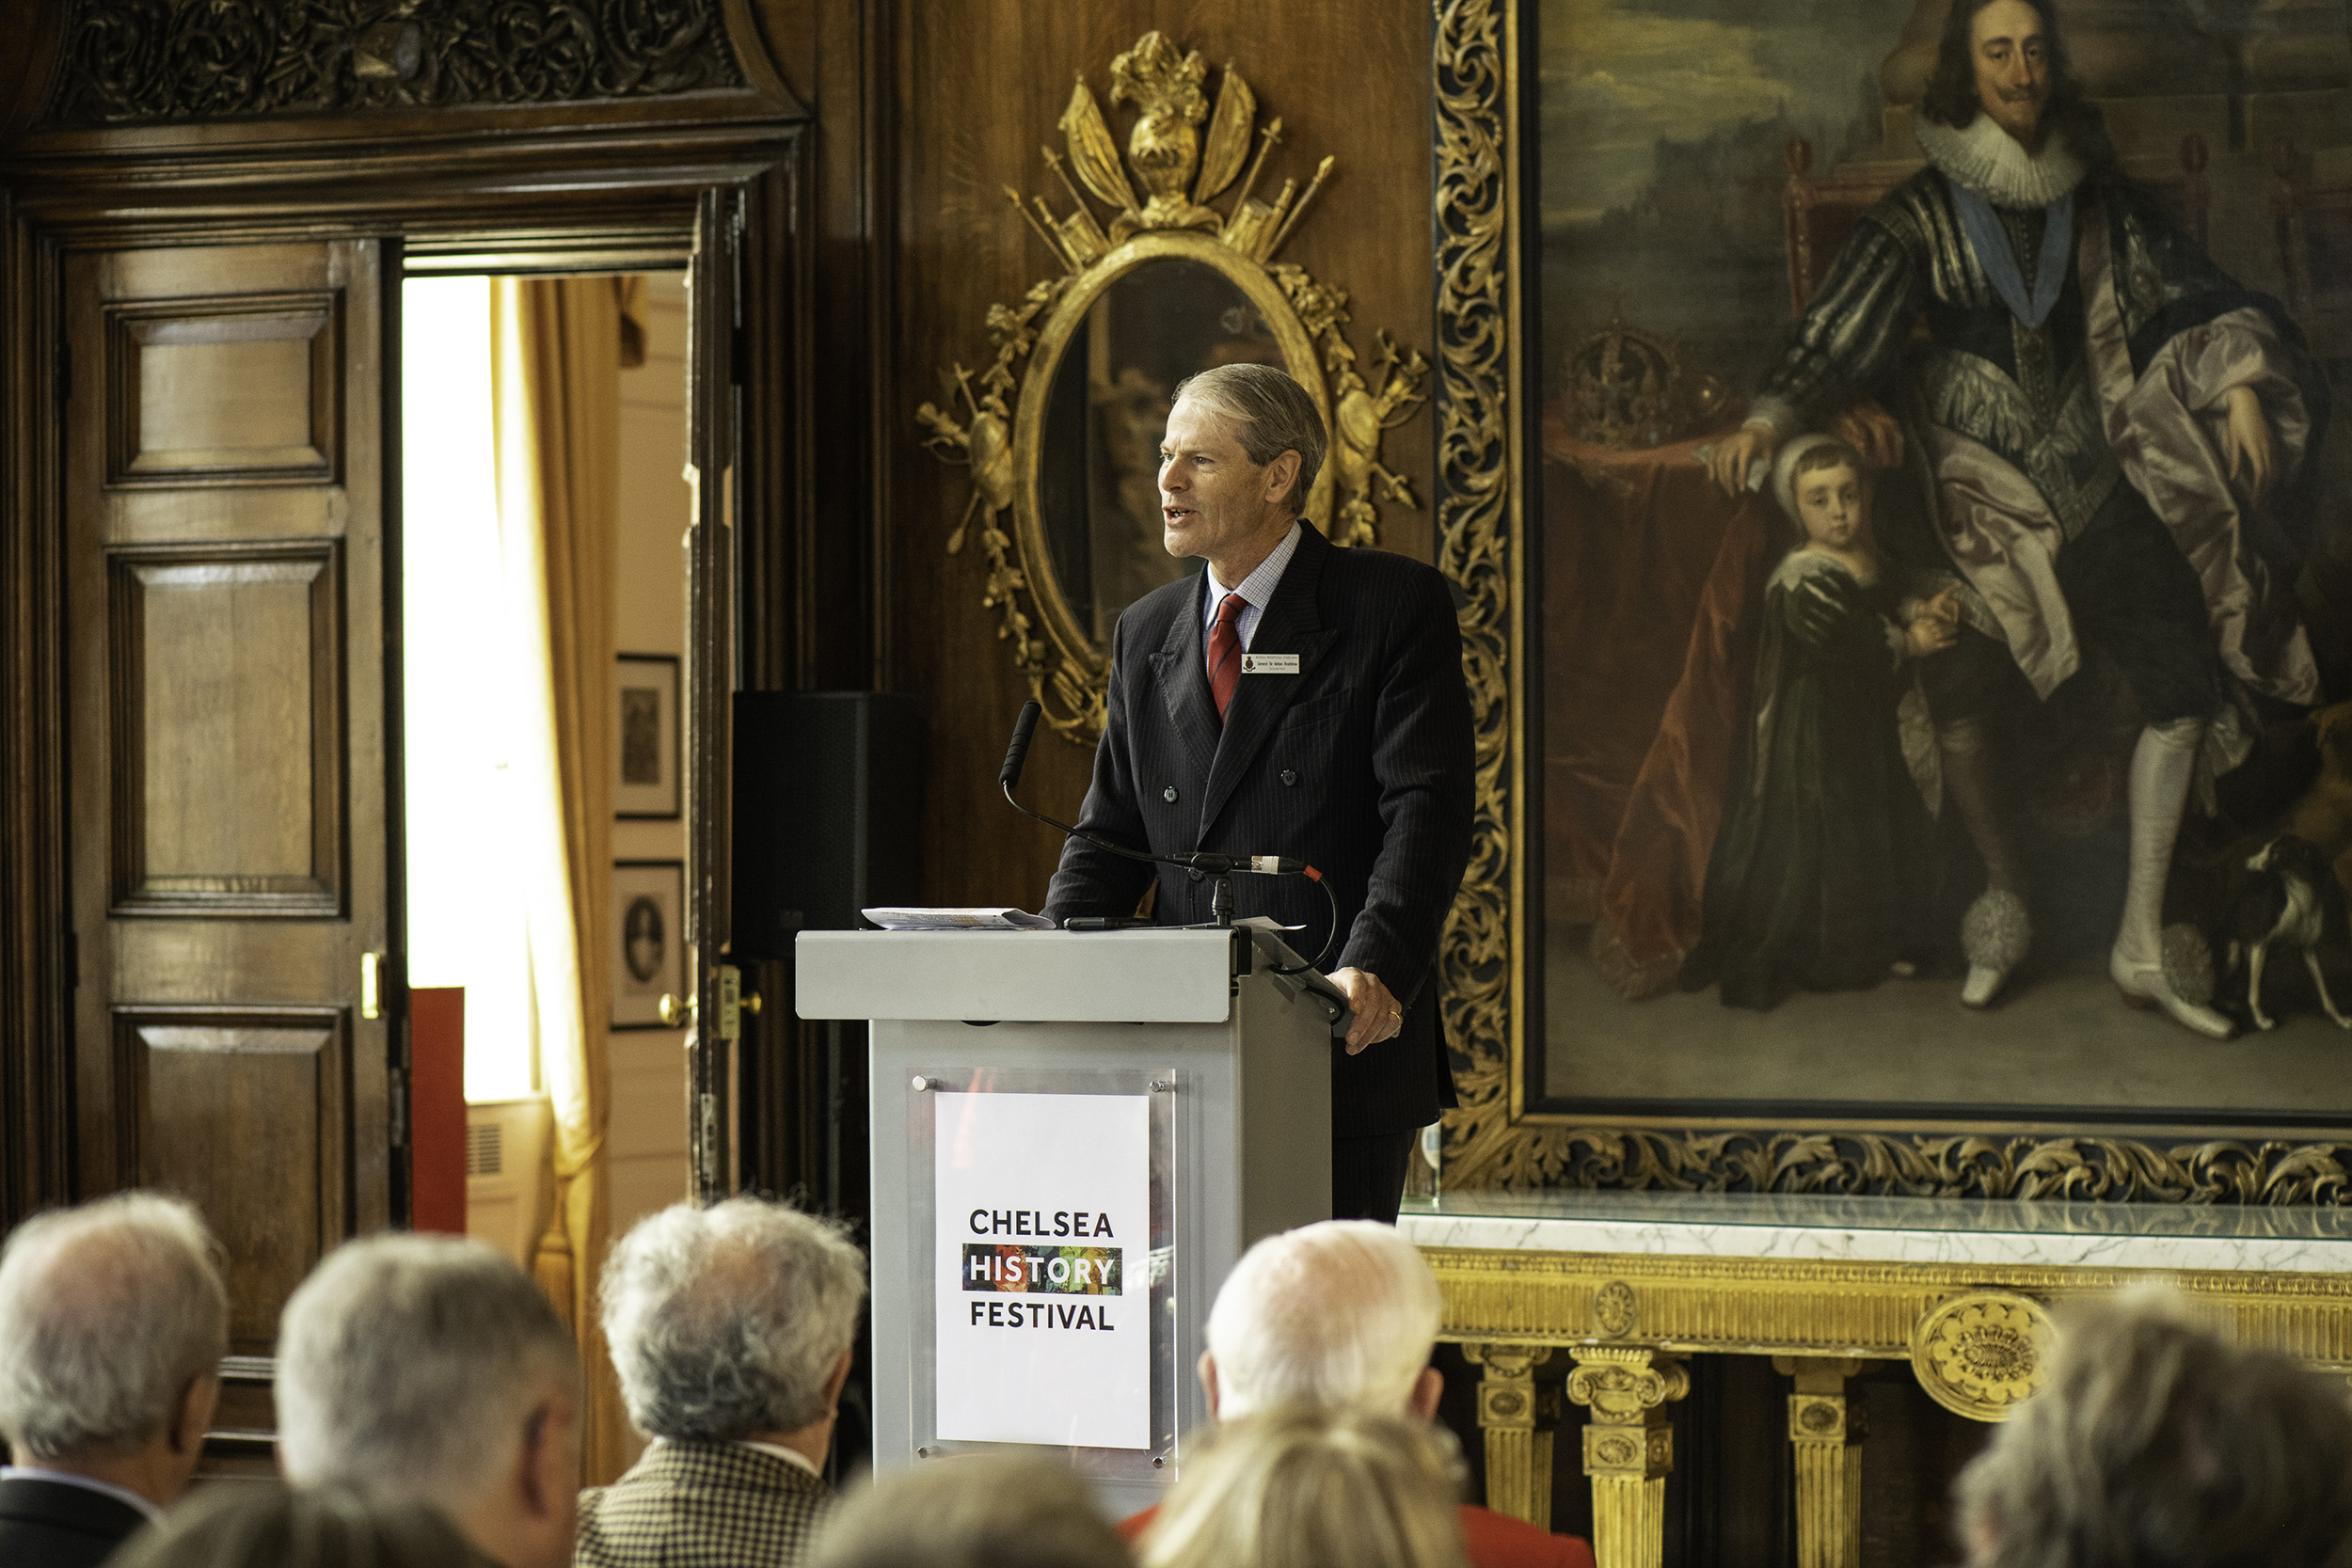 Governor of the Royal Hospital Chelsea on stage delivering a speech